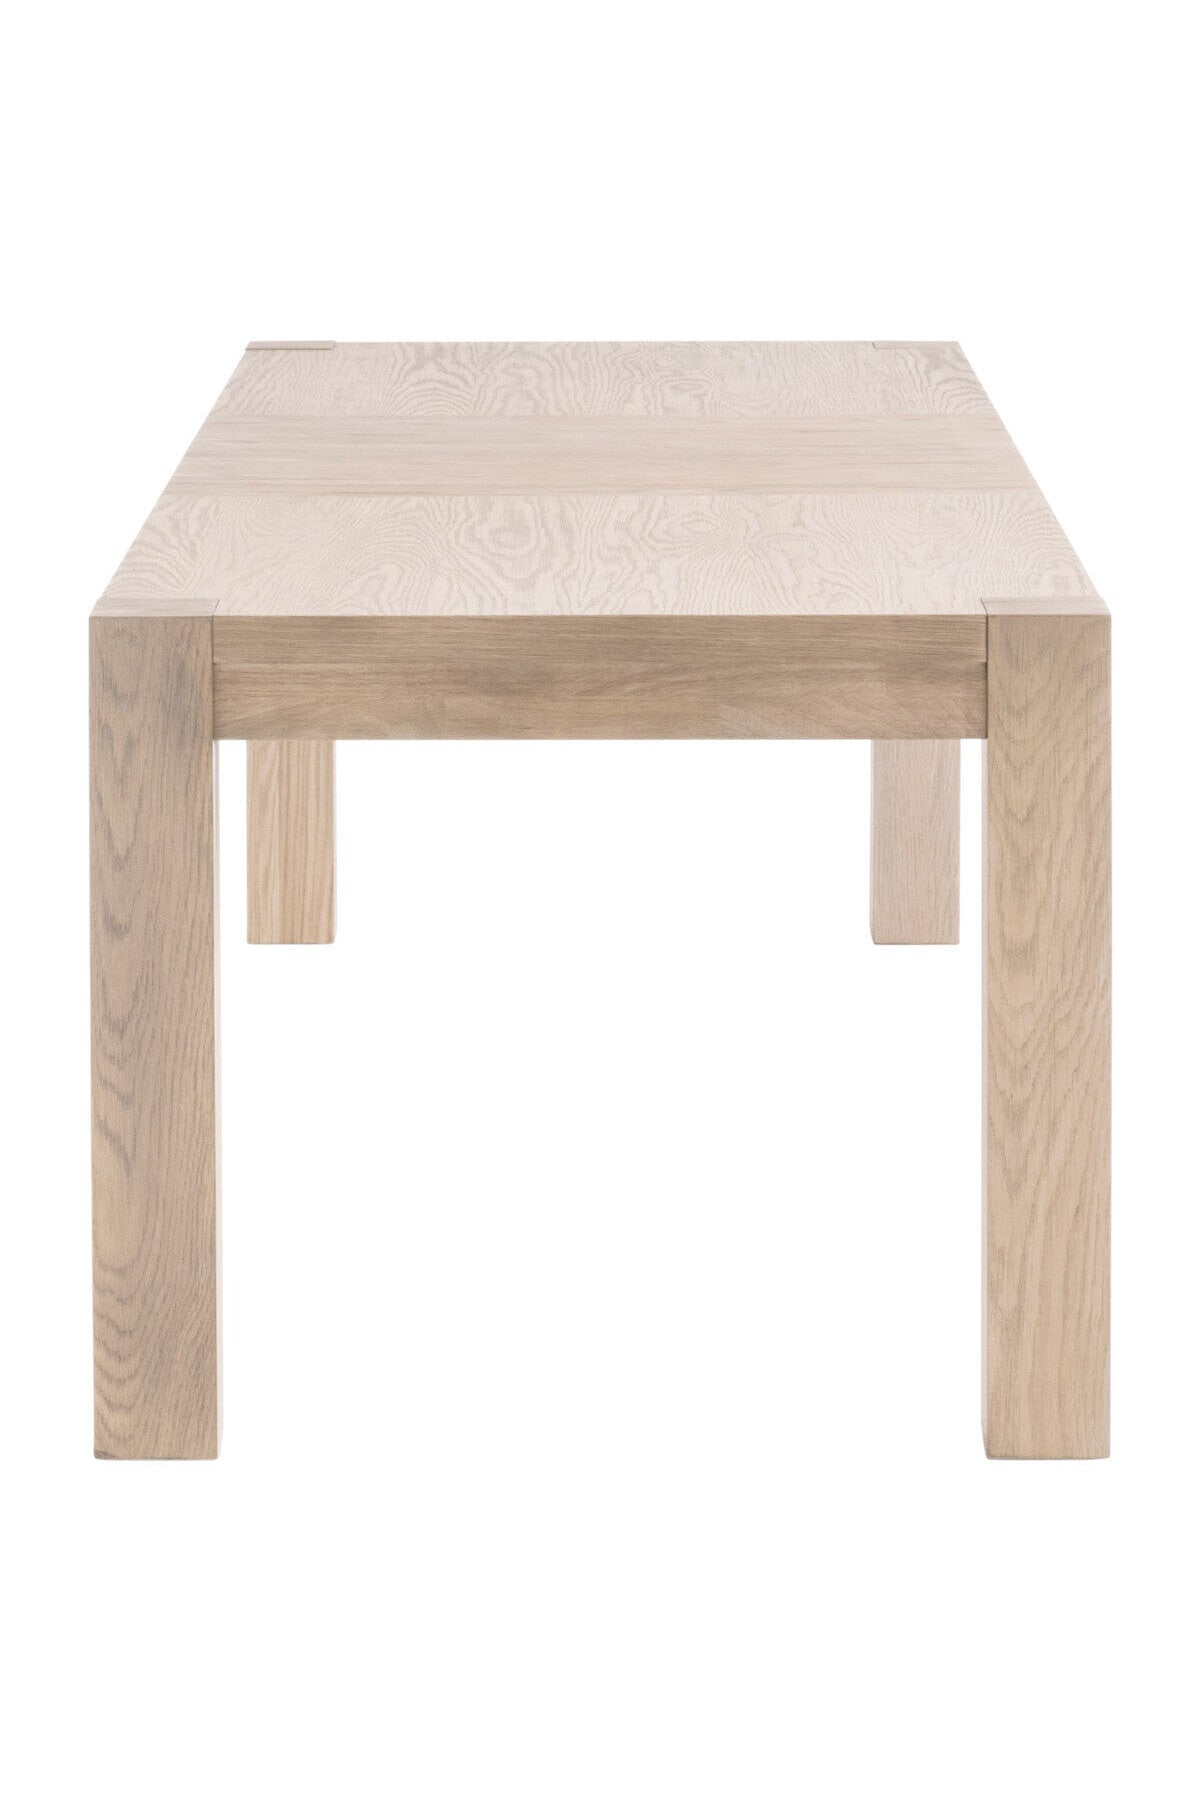 Lewis Extension Dining Table